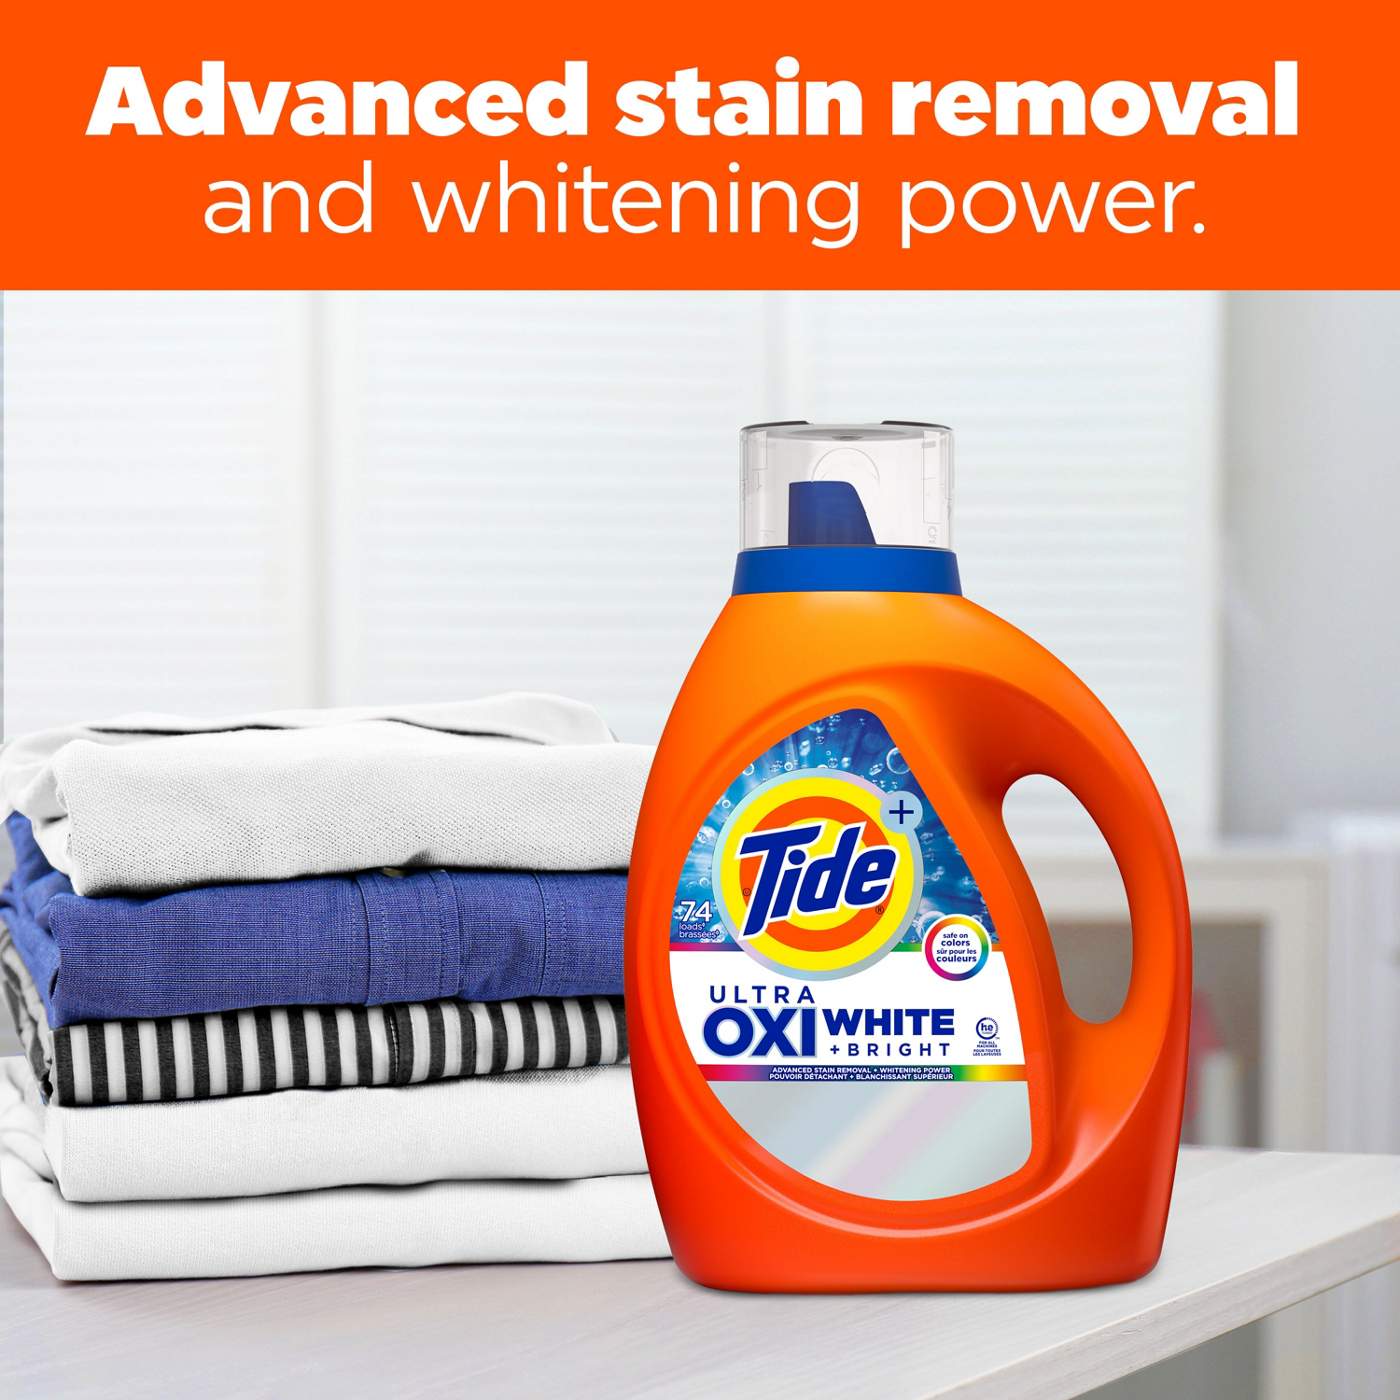 Tide + Ultra Oxi White & Bright HE Turbo Clean Liquid Laundry Detergent, 59 Loads; image 5 of 8